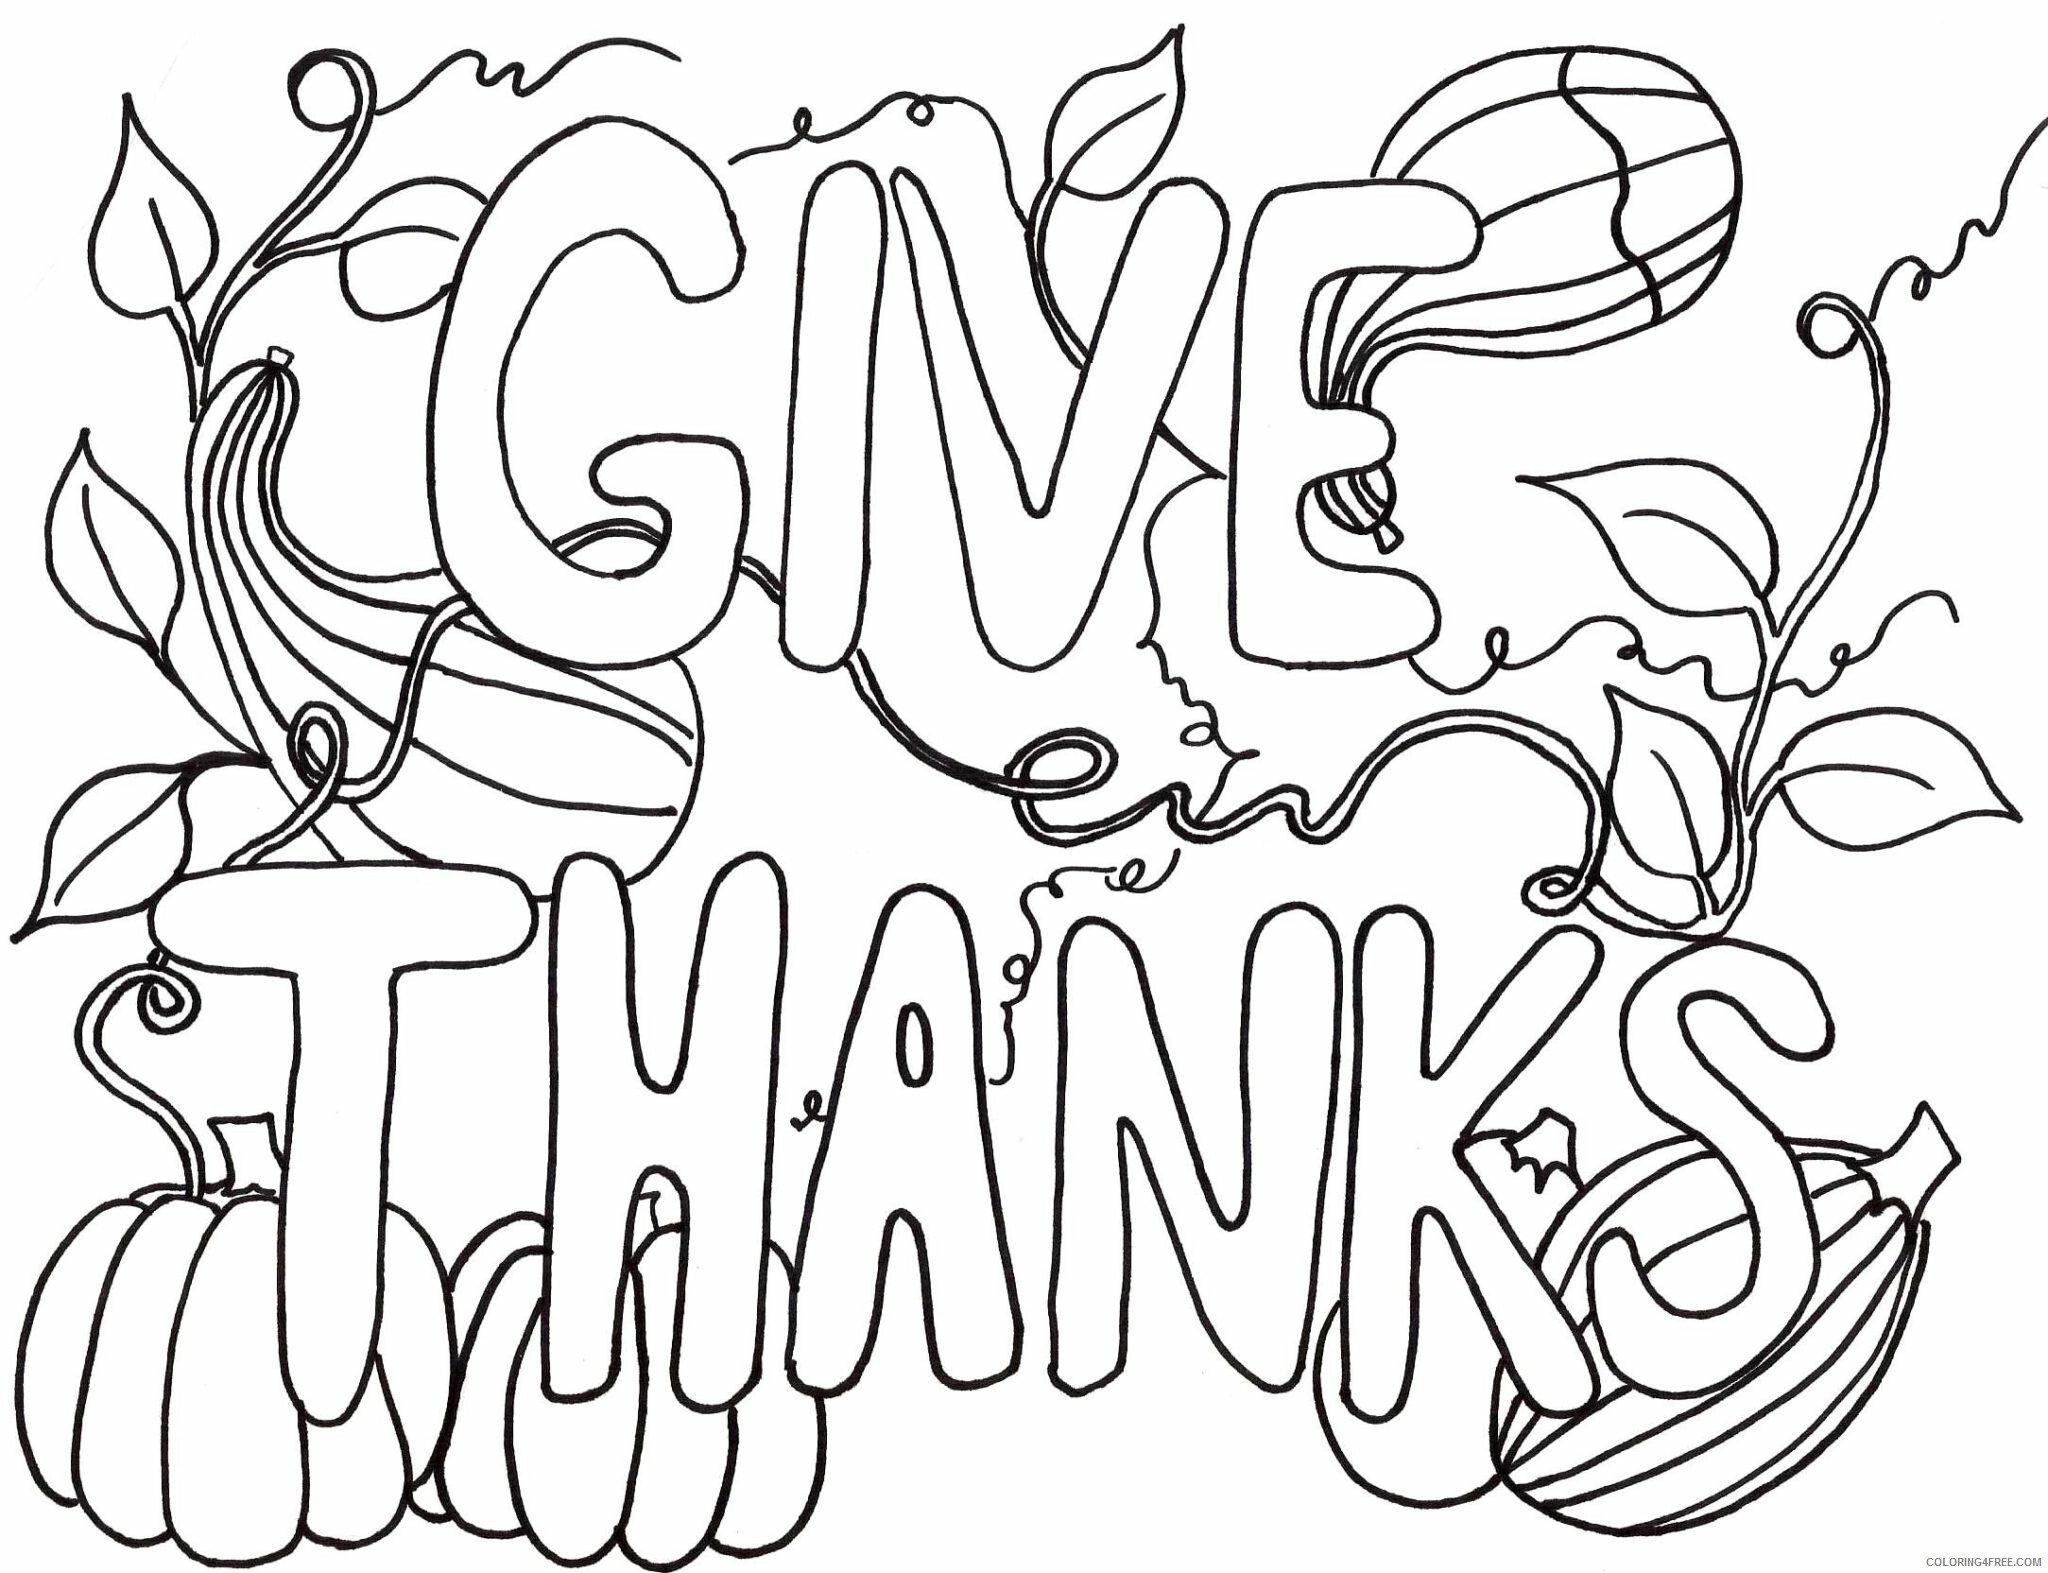 Adult Thanksgiving Coloring Pages Easy Thanksgiving for Adults Printable 2020 459 Coloring4free